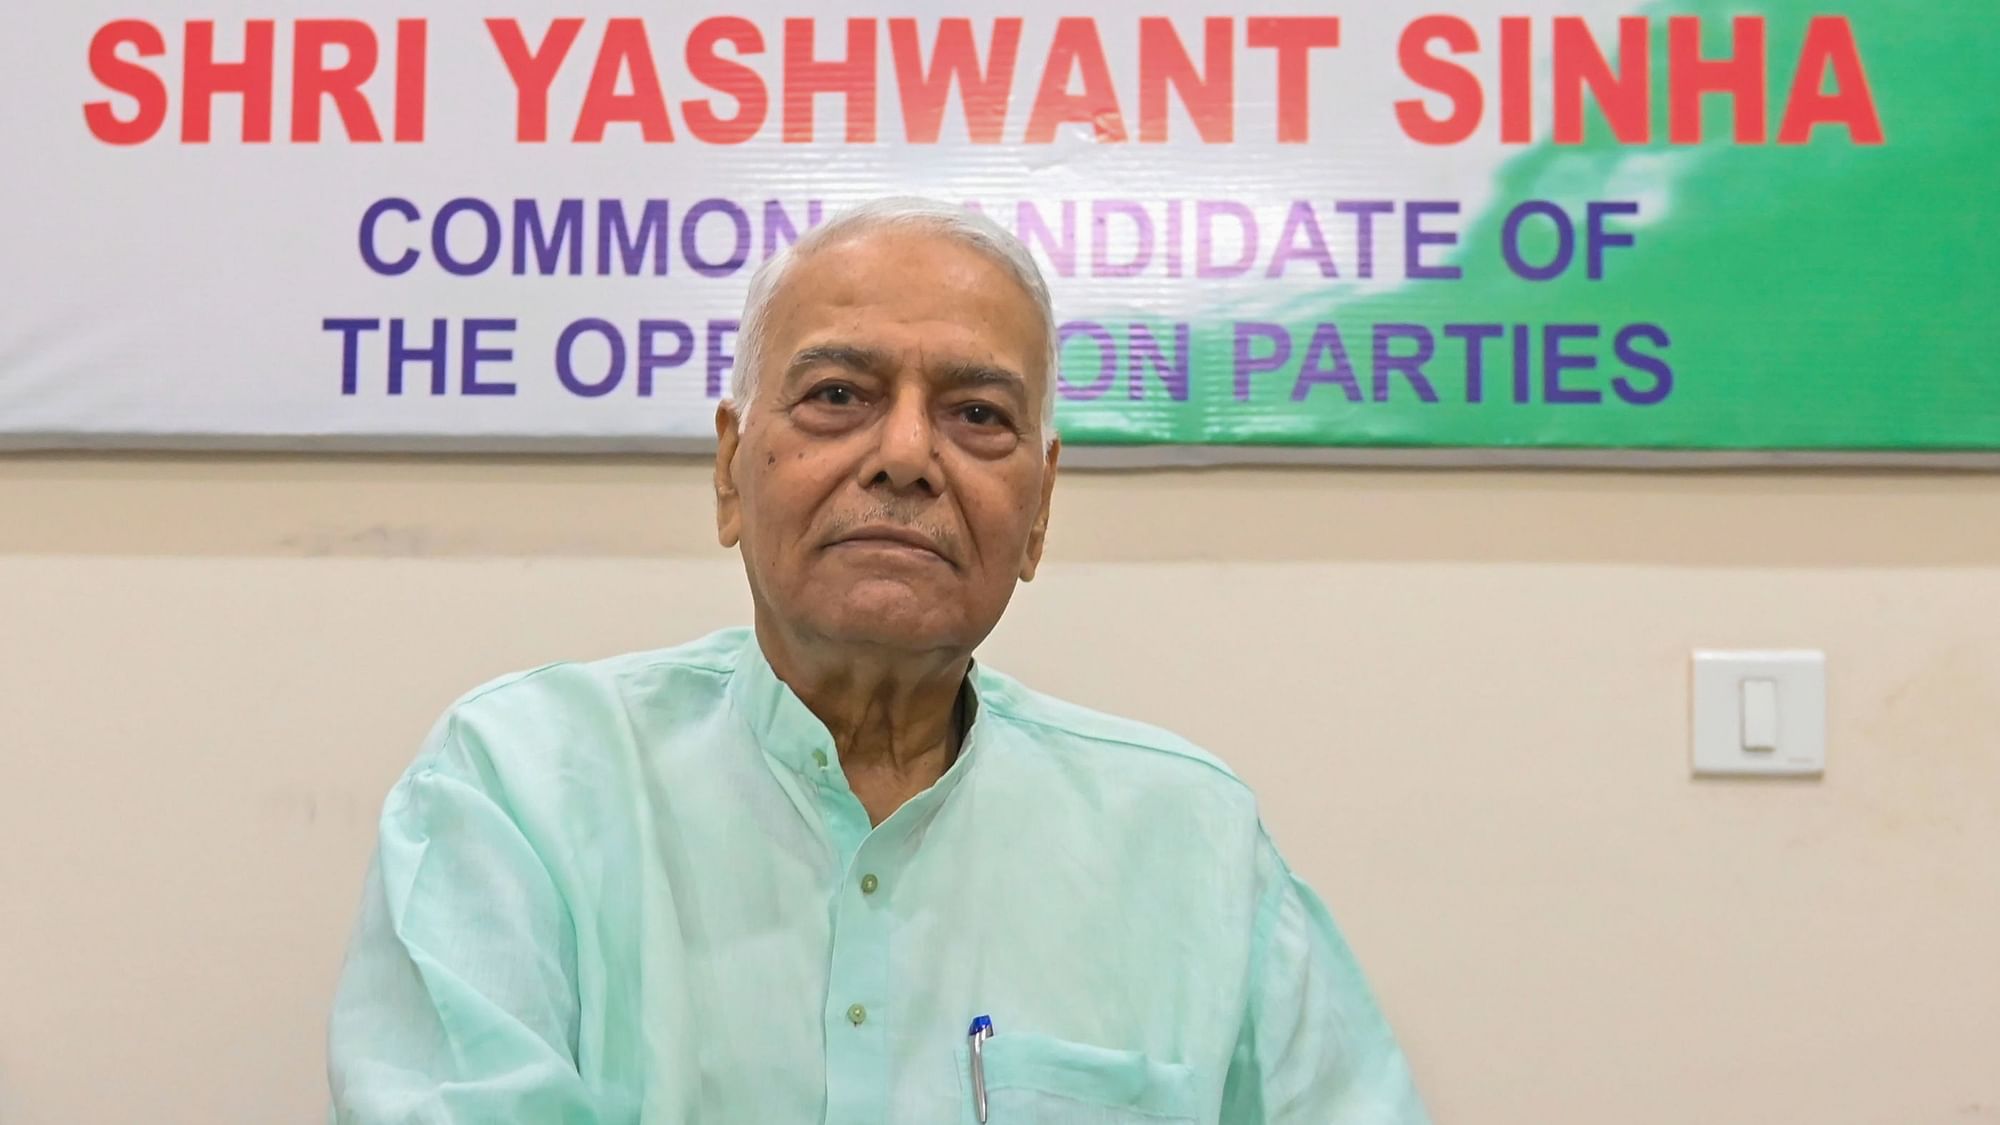 <div class="paragraphs"><p>The Opposition's presidential candidate <a href="https://www.thequint.com/news/politics/presidential-elections-opposition-yashwant-sinha-murmu-tribals-bjp">Yashwant Sin<a href="https://www.thequint.com/news/politics/presidential-elections-opposition-yashwant-sinha-murmu-tribals-bjp">h</a></a><a href="https://www.thequint.com/news/politics/presidential-elections-opposition-yashwant-sinha-murmu-tribals-bjp">a</a></p></div>